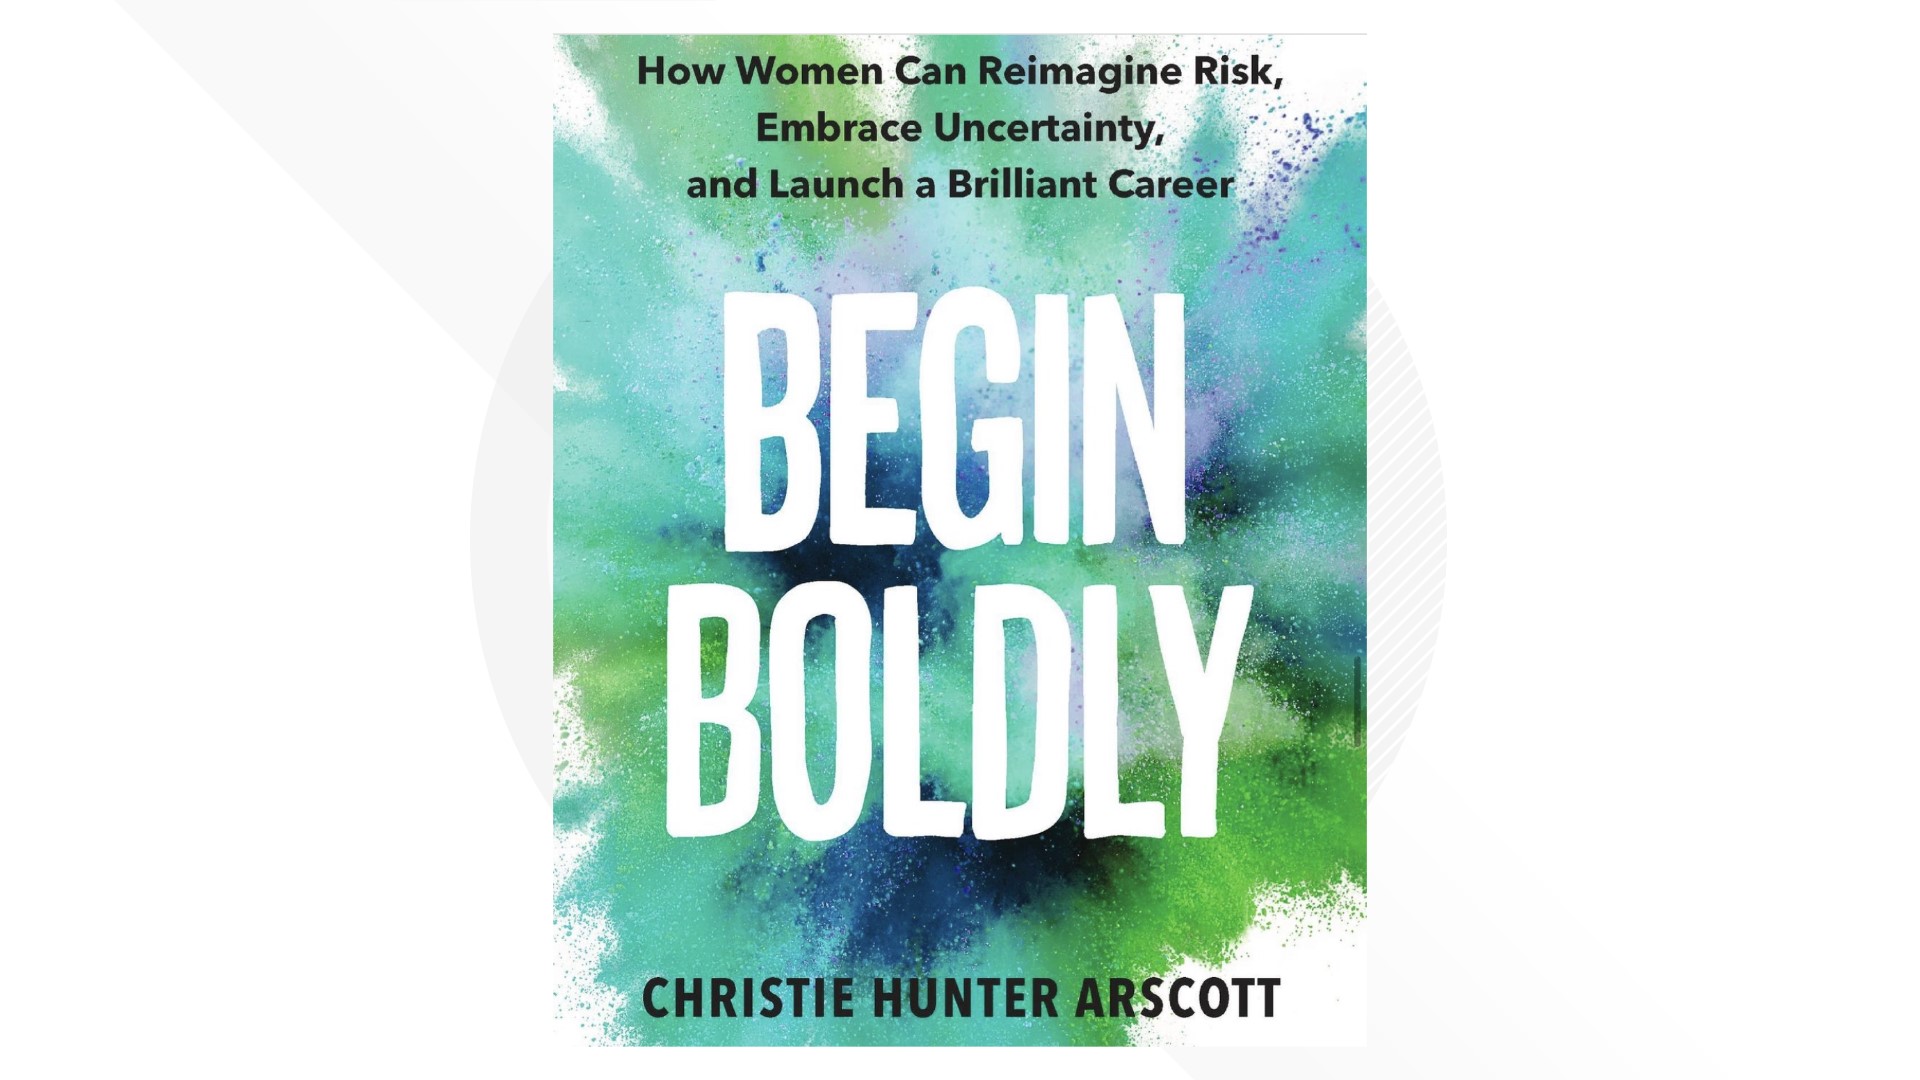 Author, Christie Hunter Arscott, discusses how her new book, 'Begin Boldly: Reimagine Risk, Embrace Uncertainty, and Launch a Brilliant Career.'